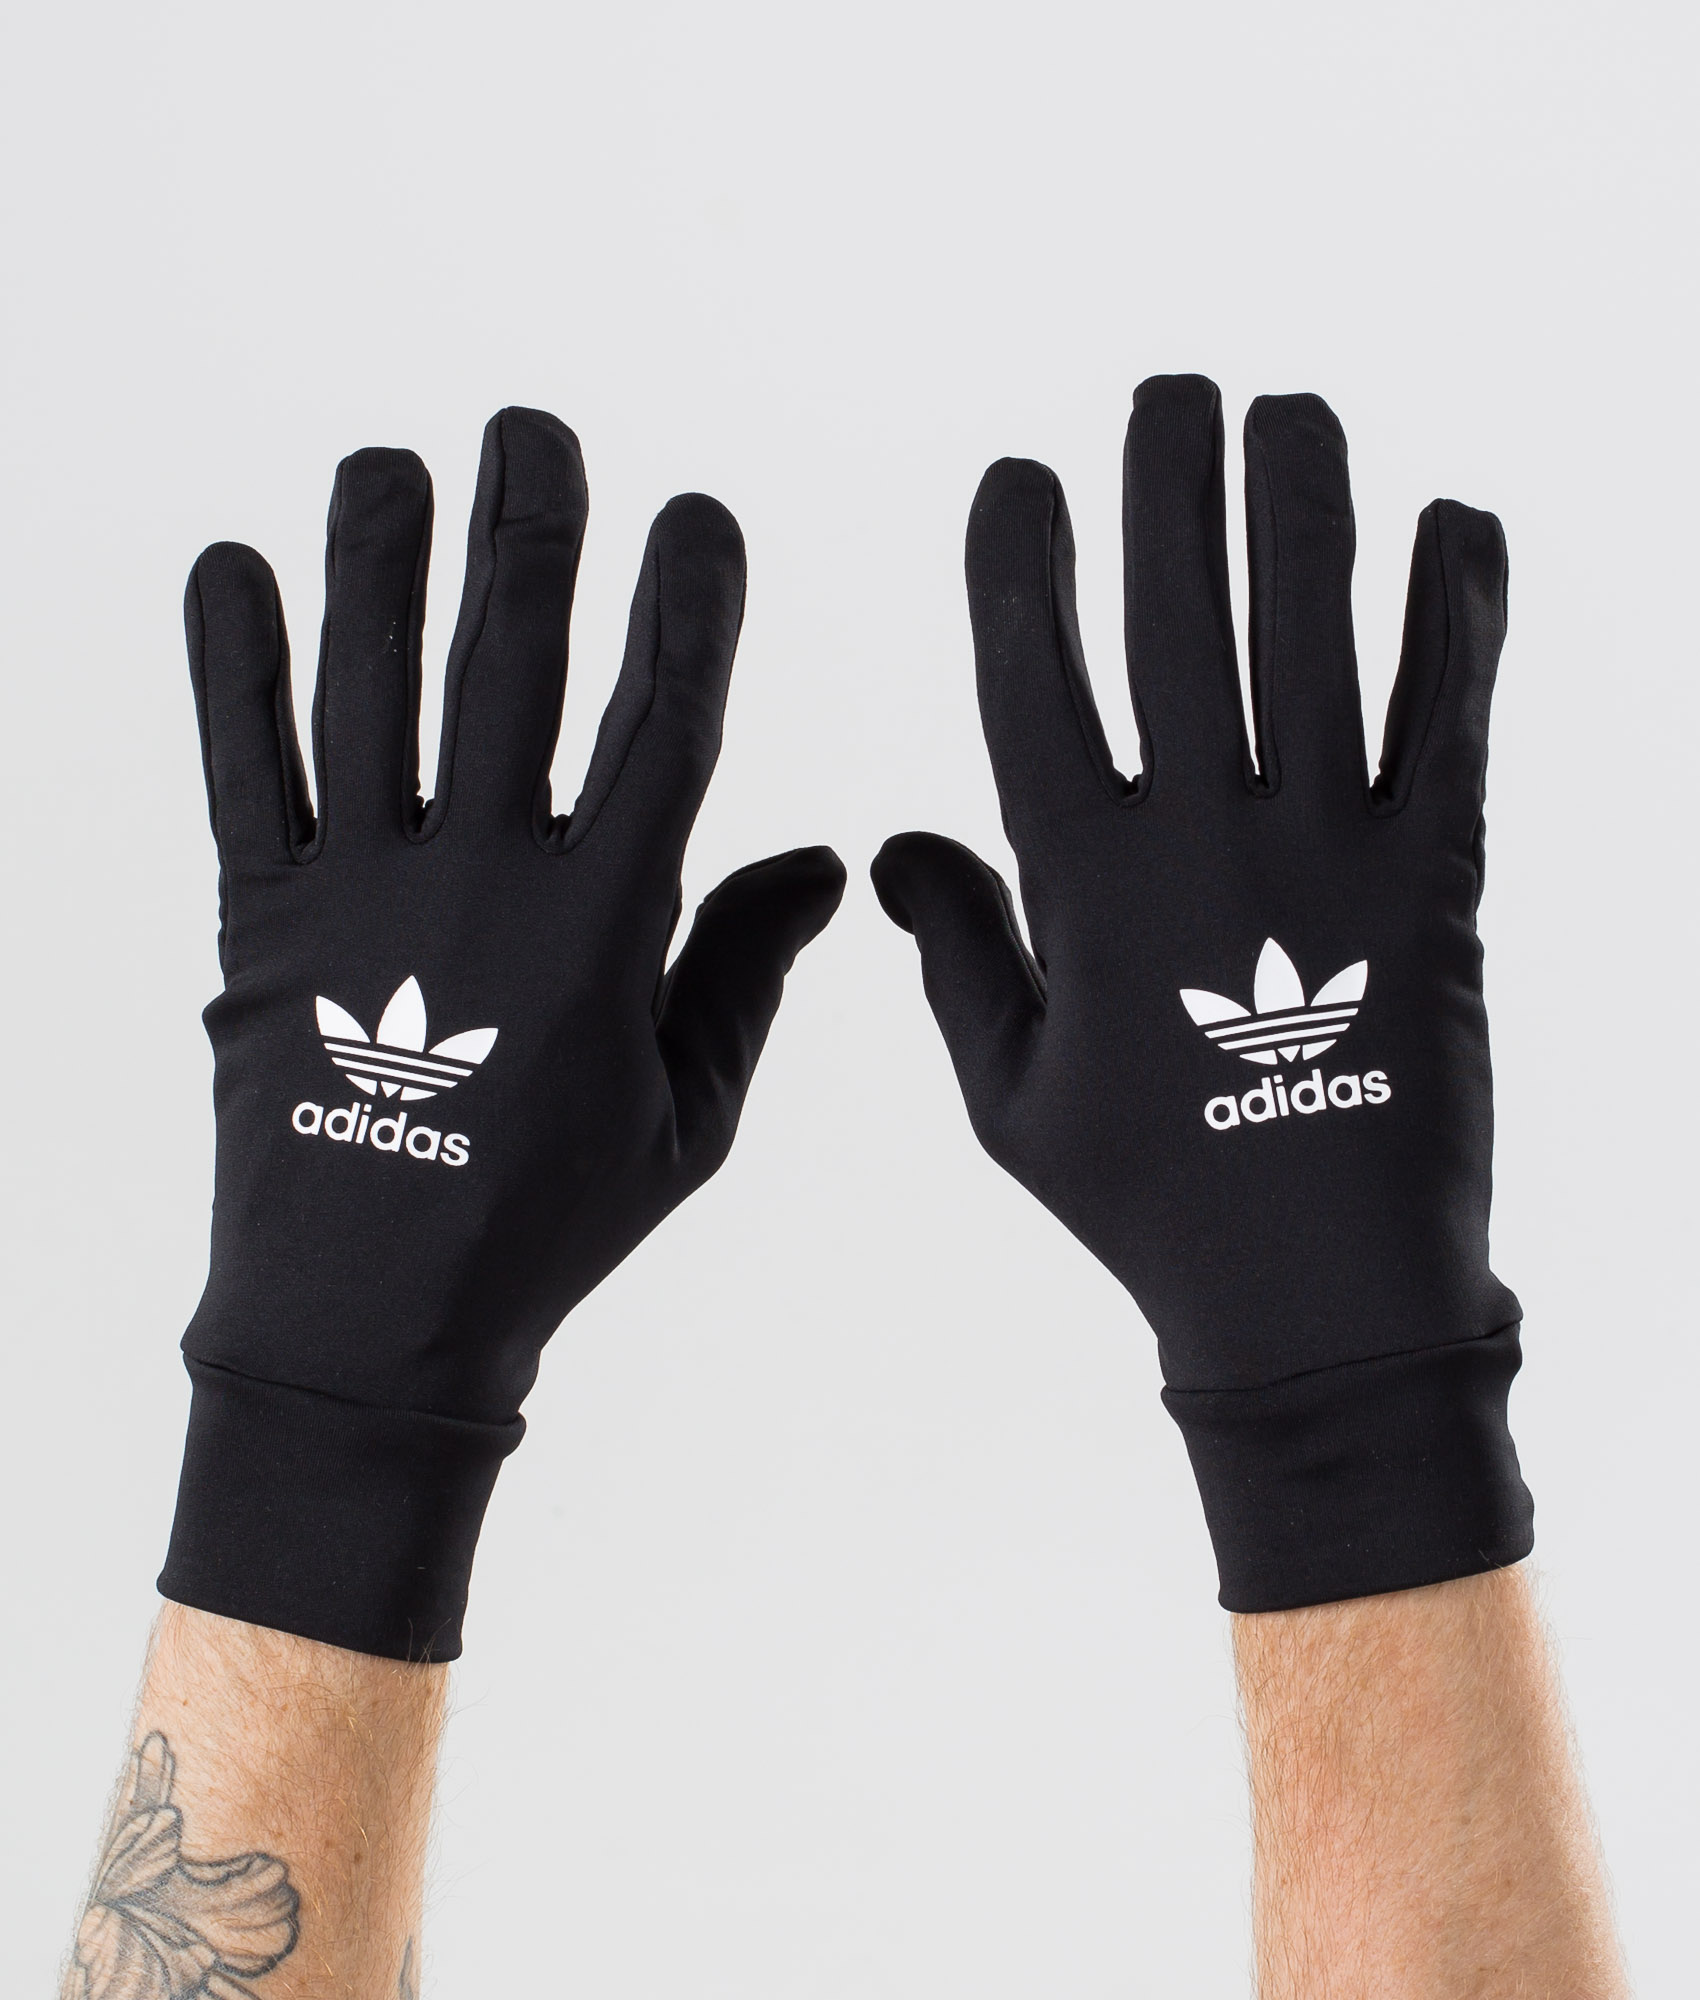 adidas hand gloves for winter